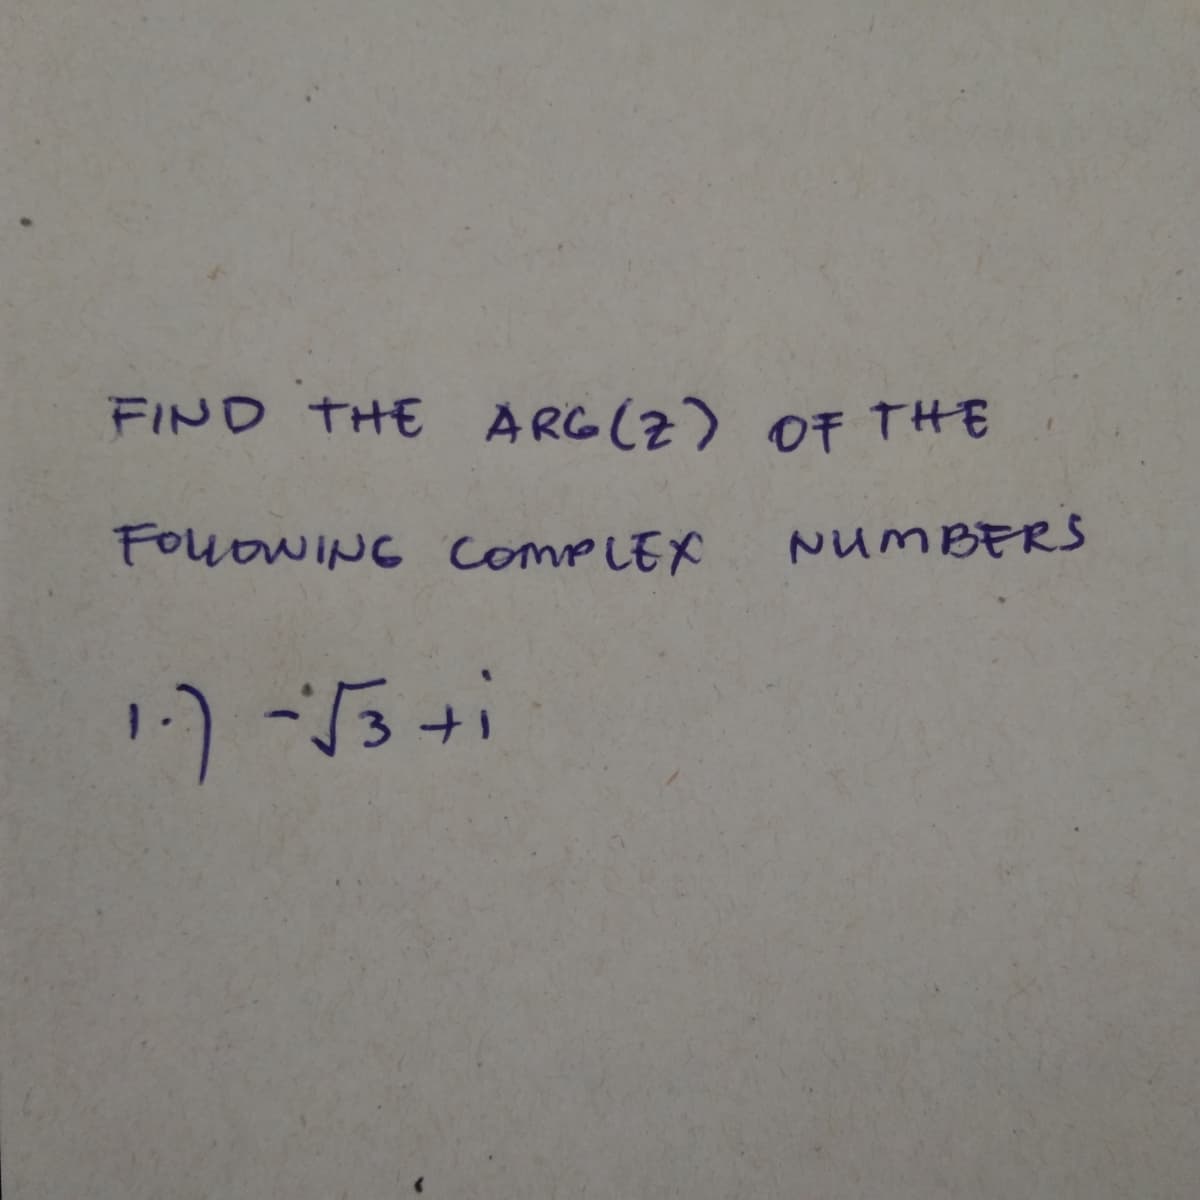 FIND THE ARG(Z) 0F THE
FOUOWING CompLEX
NUMBERS
